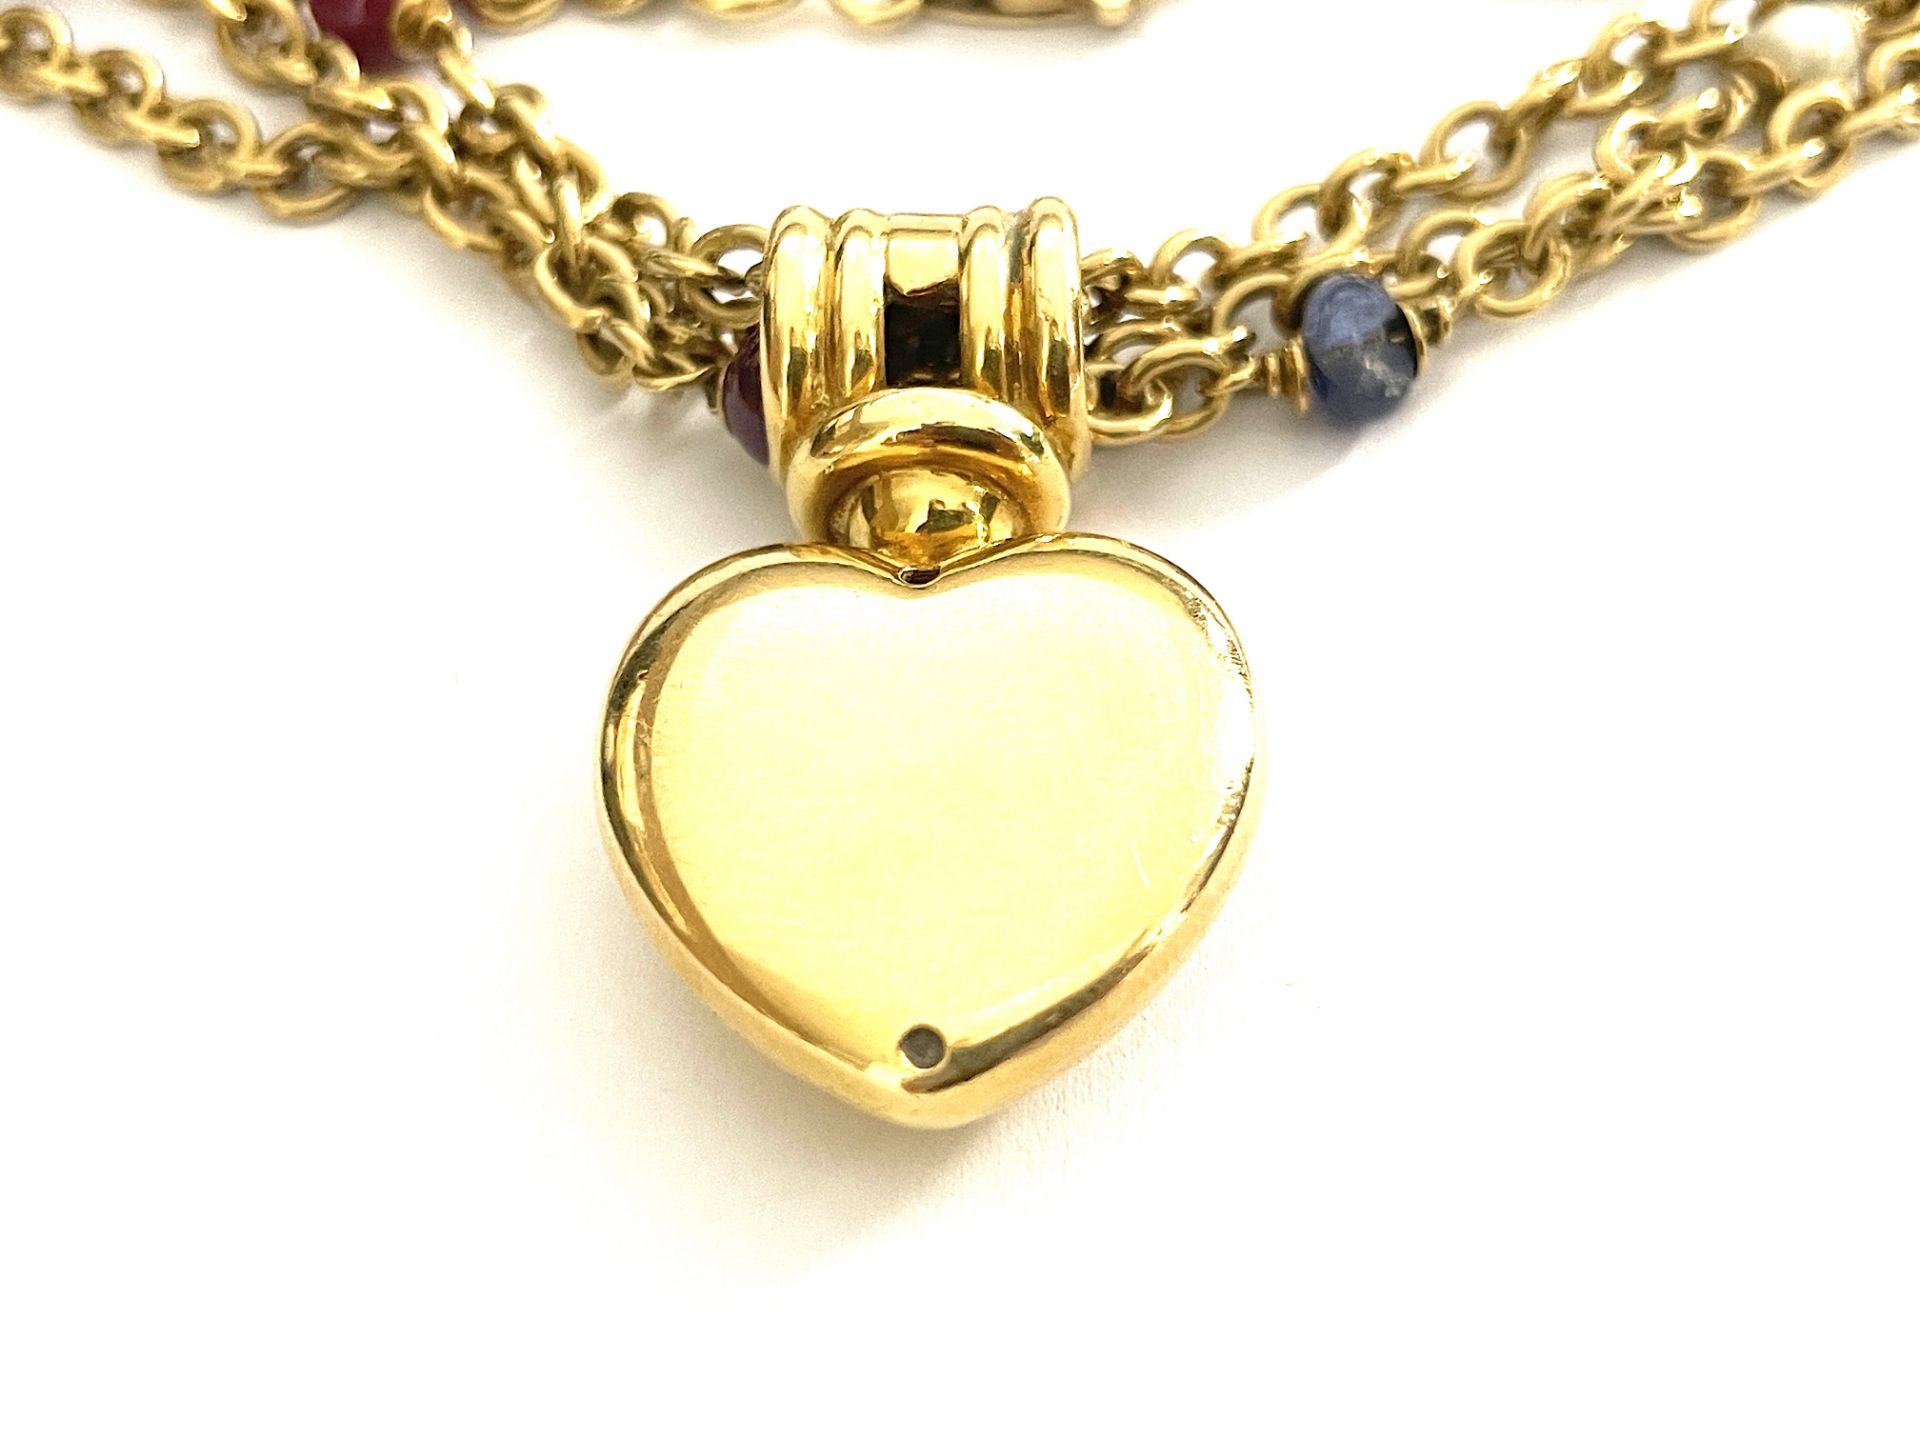 3 strands gemstone necklace with diamond heart - Image 5 of 6